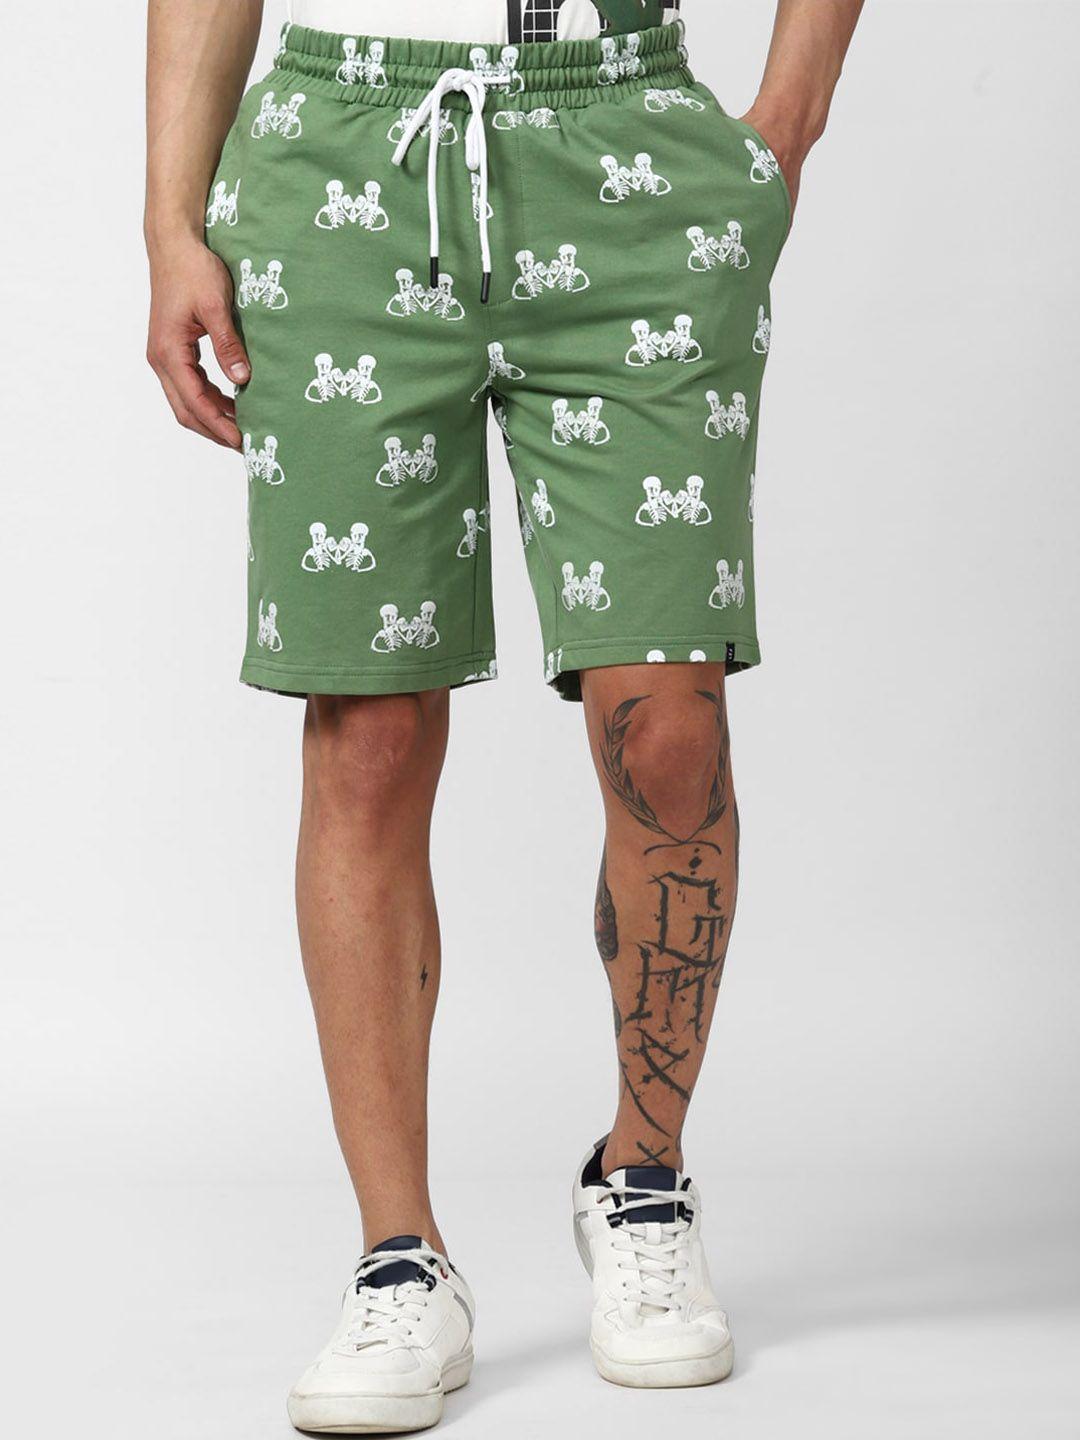 forever-21-men-green-conversational-printed-mid-rise-knee-length-shorts